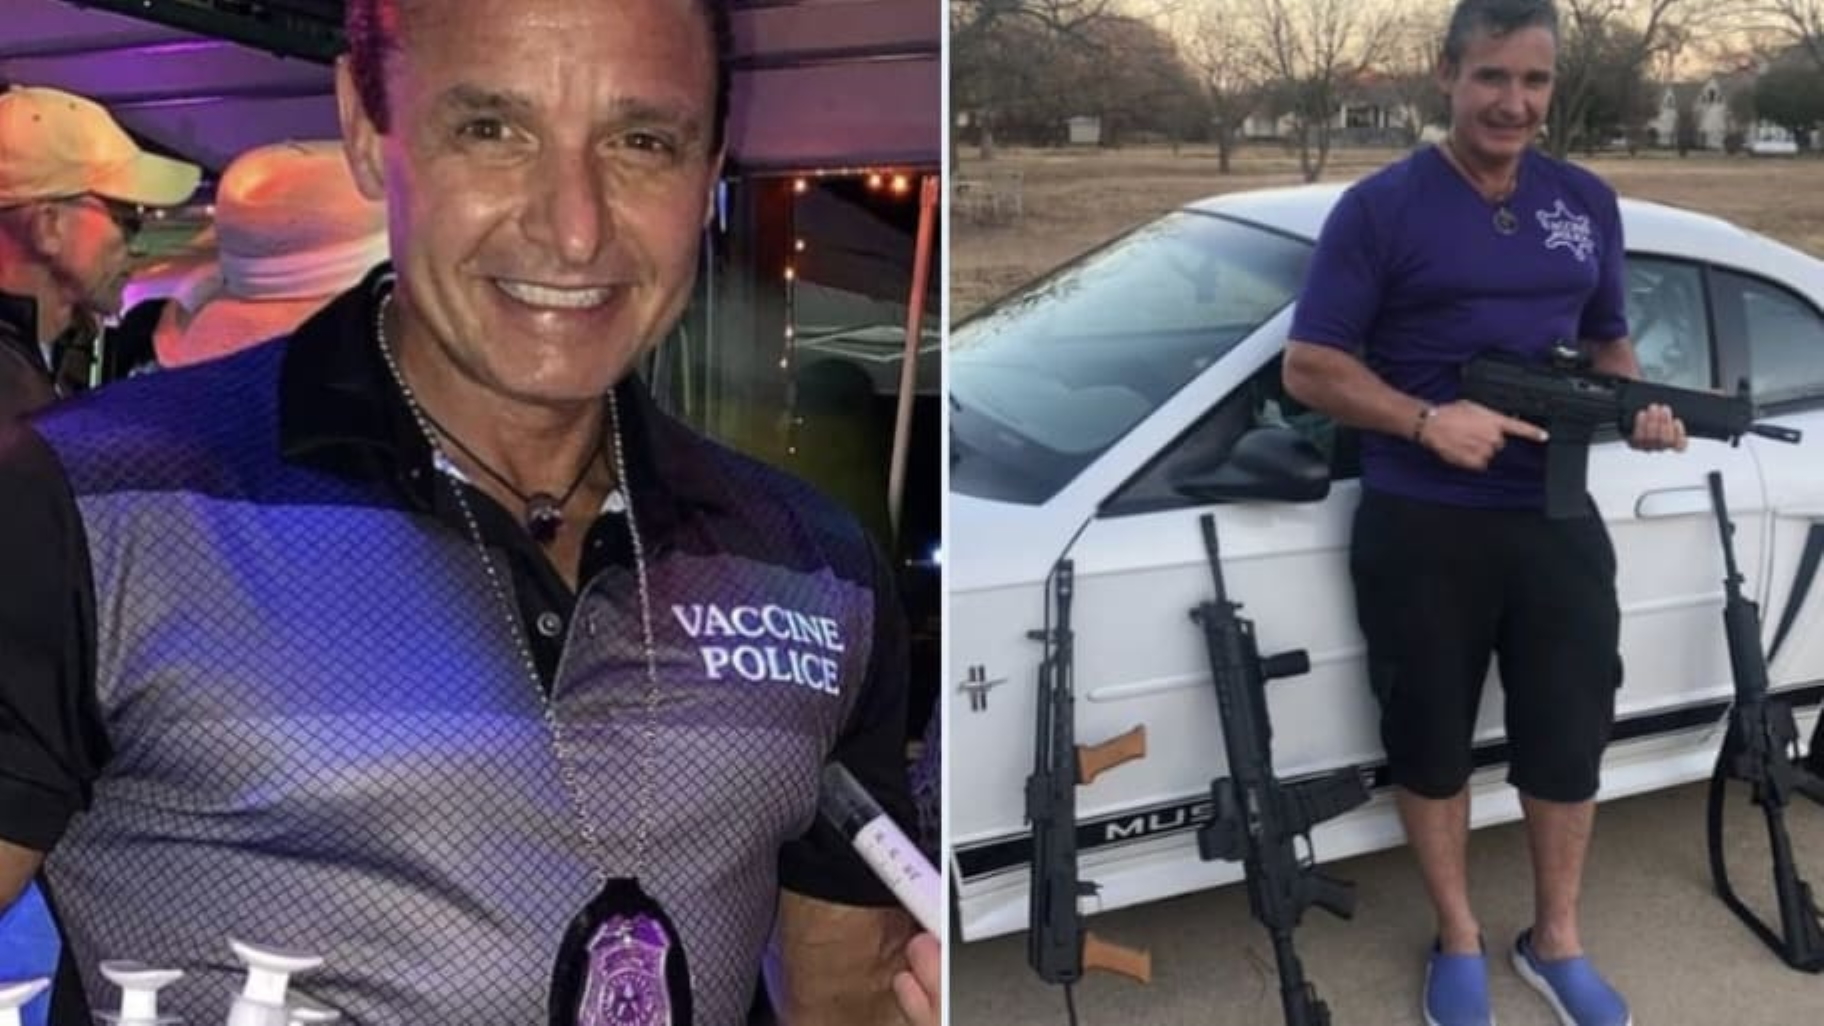 Anti-COVID-19 “Vaccine Police” leader Christopher Key poses with multiple guns. On 9 January 2022, Key told The Daily Beast he advocates what he calls “urine therapy” and railed against “foolish” people who took the COVID-19 vaccine, which is safe and effective. Photo: Telegram